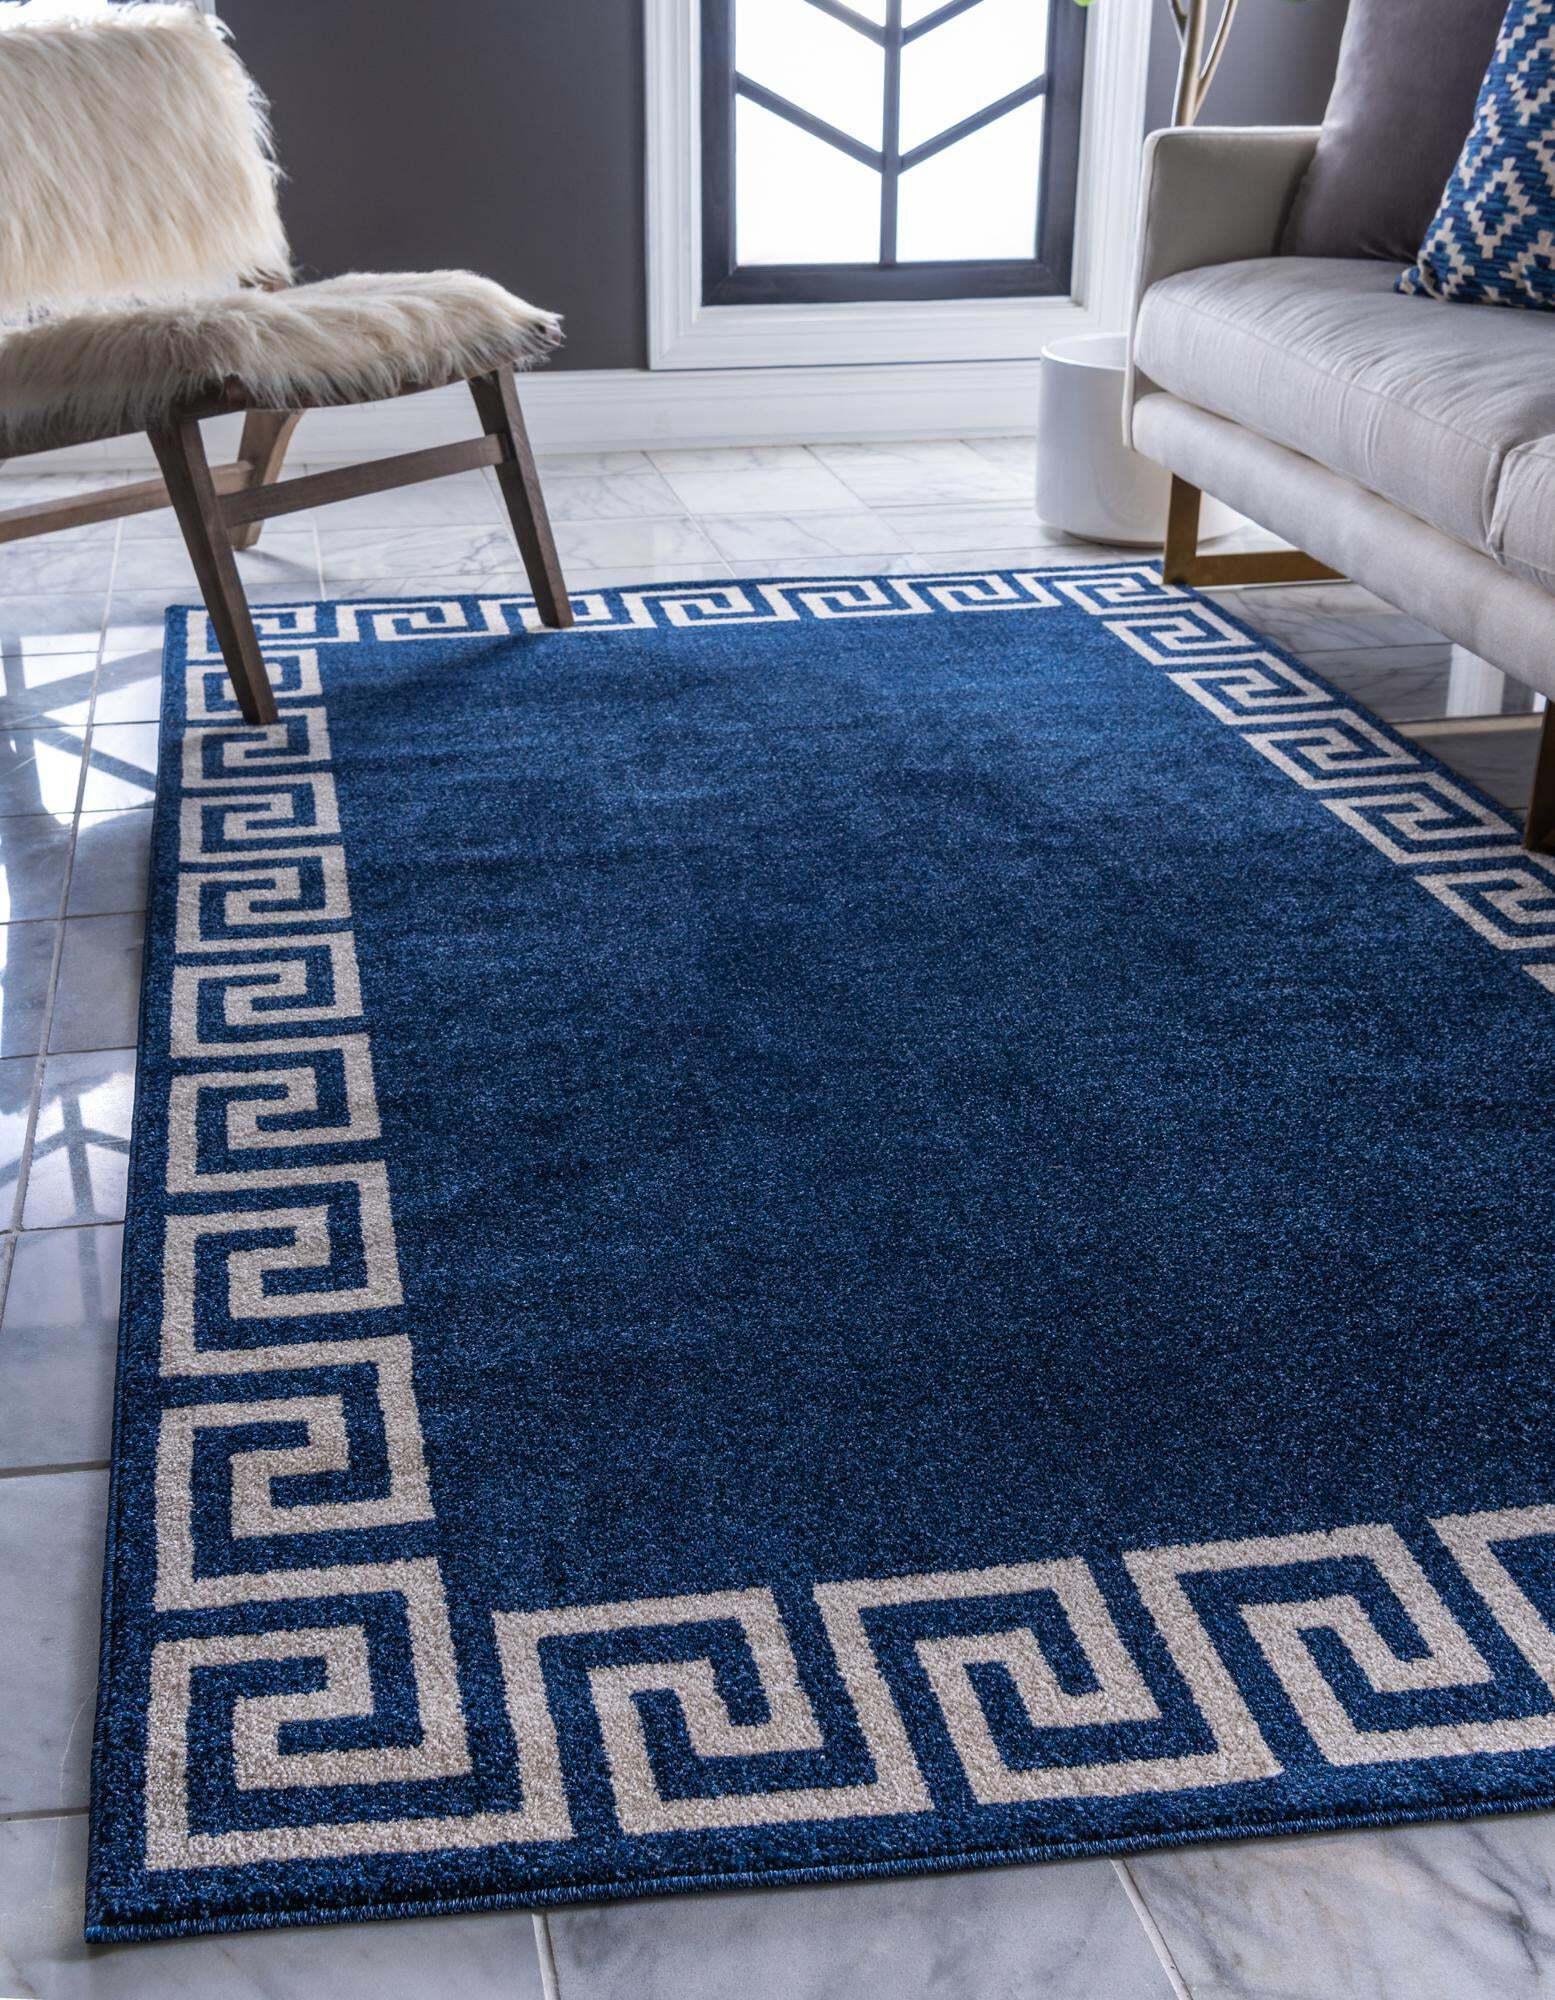 Unique Loom Indoor Rugs - Athens 5' x 8' Rectangle Rug Navy Blue